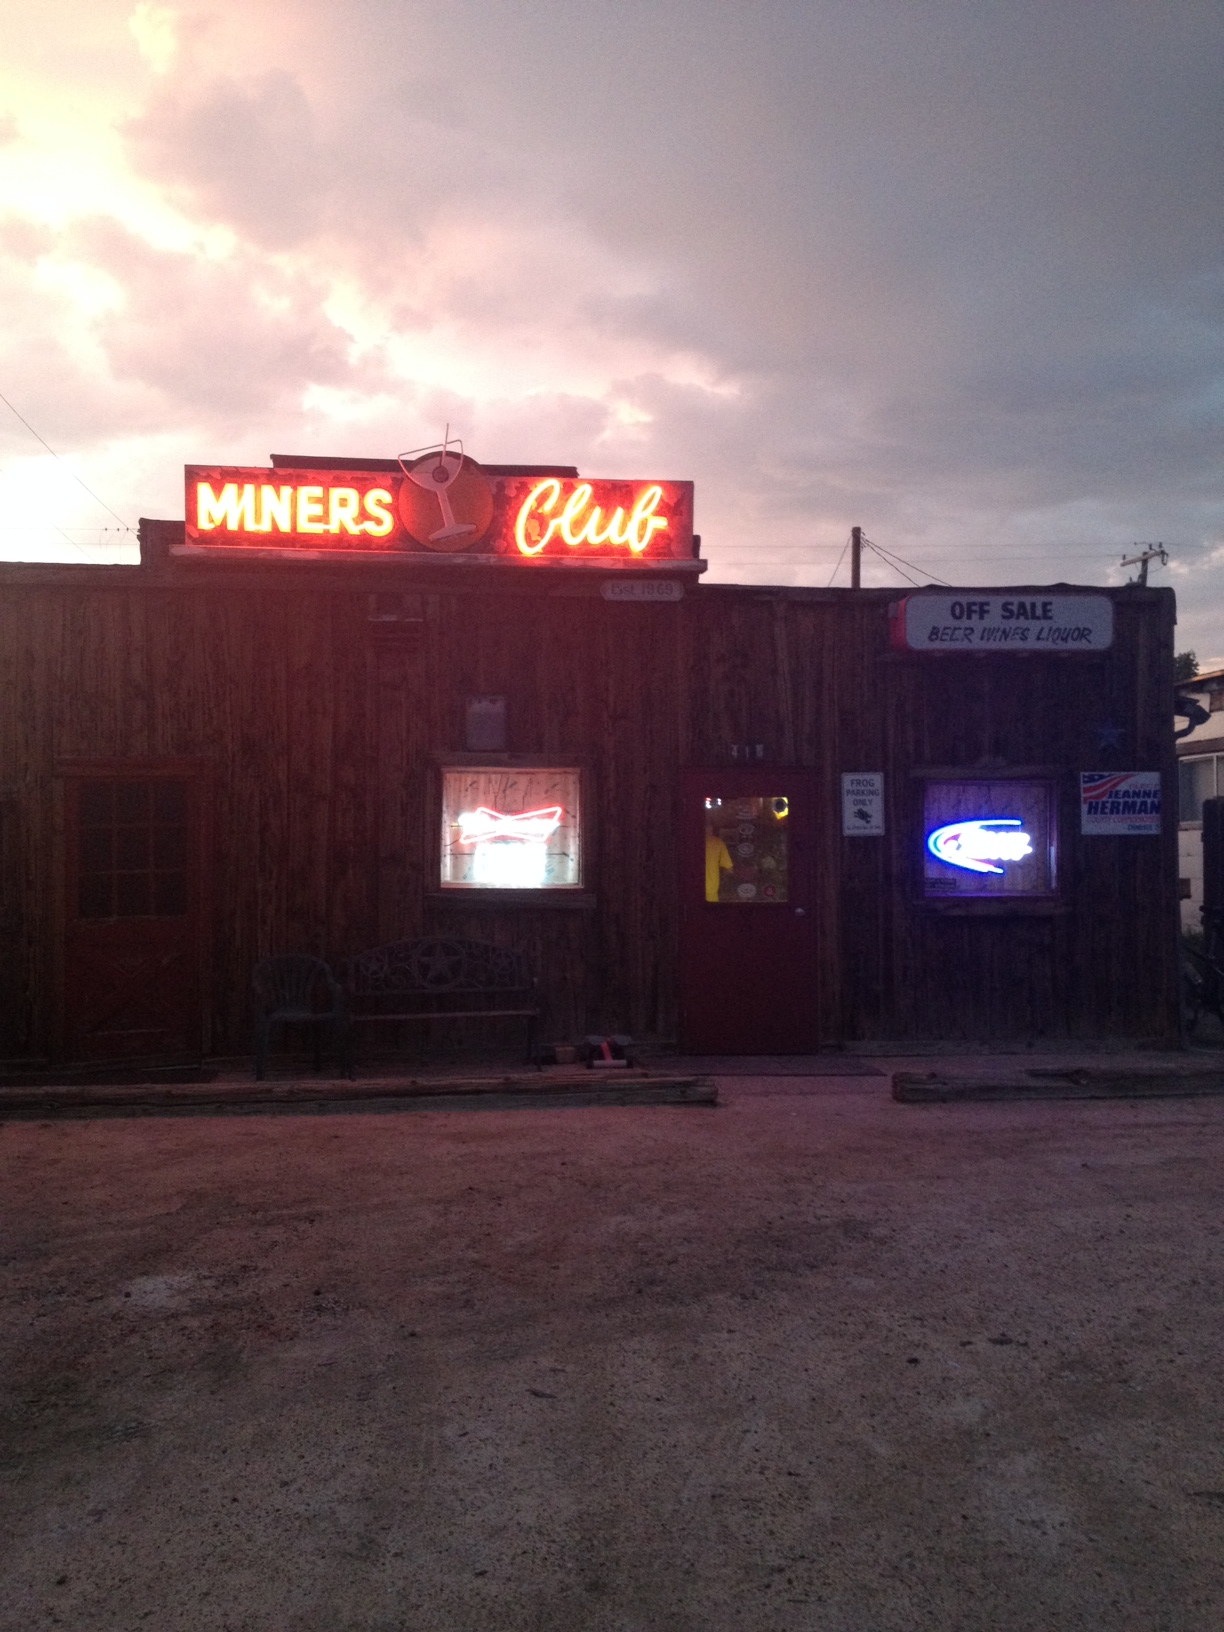 are you in the miner's club?